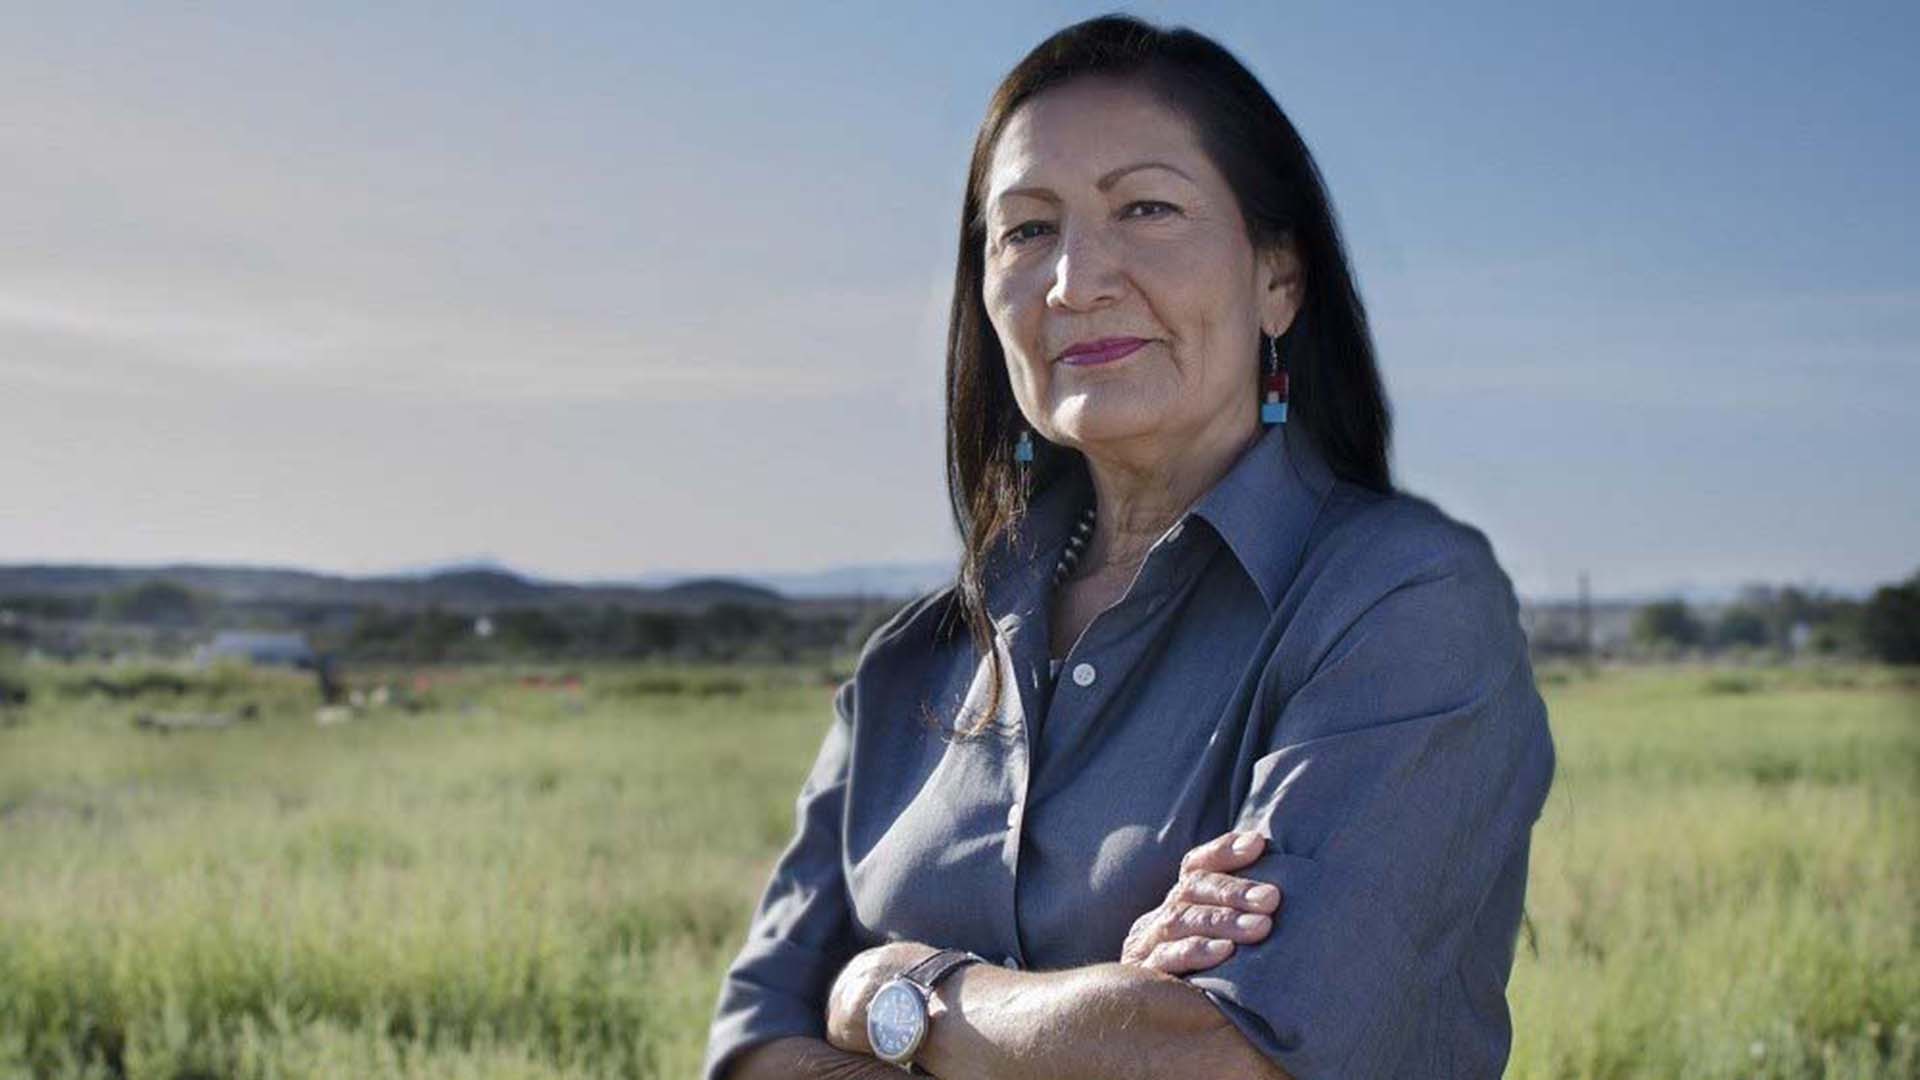 Secretary of the U.S. Department Interior Deb Haaland. She represented New Mexico in the U.S. House of Representatives from 2019-2021.